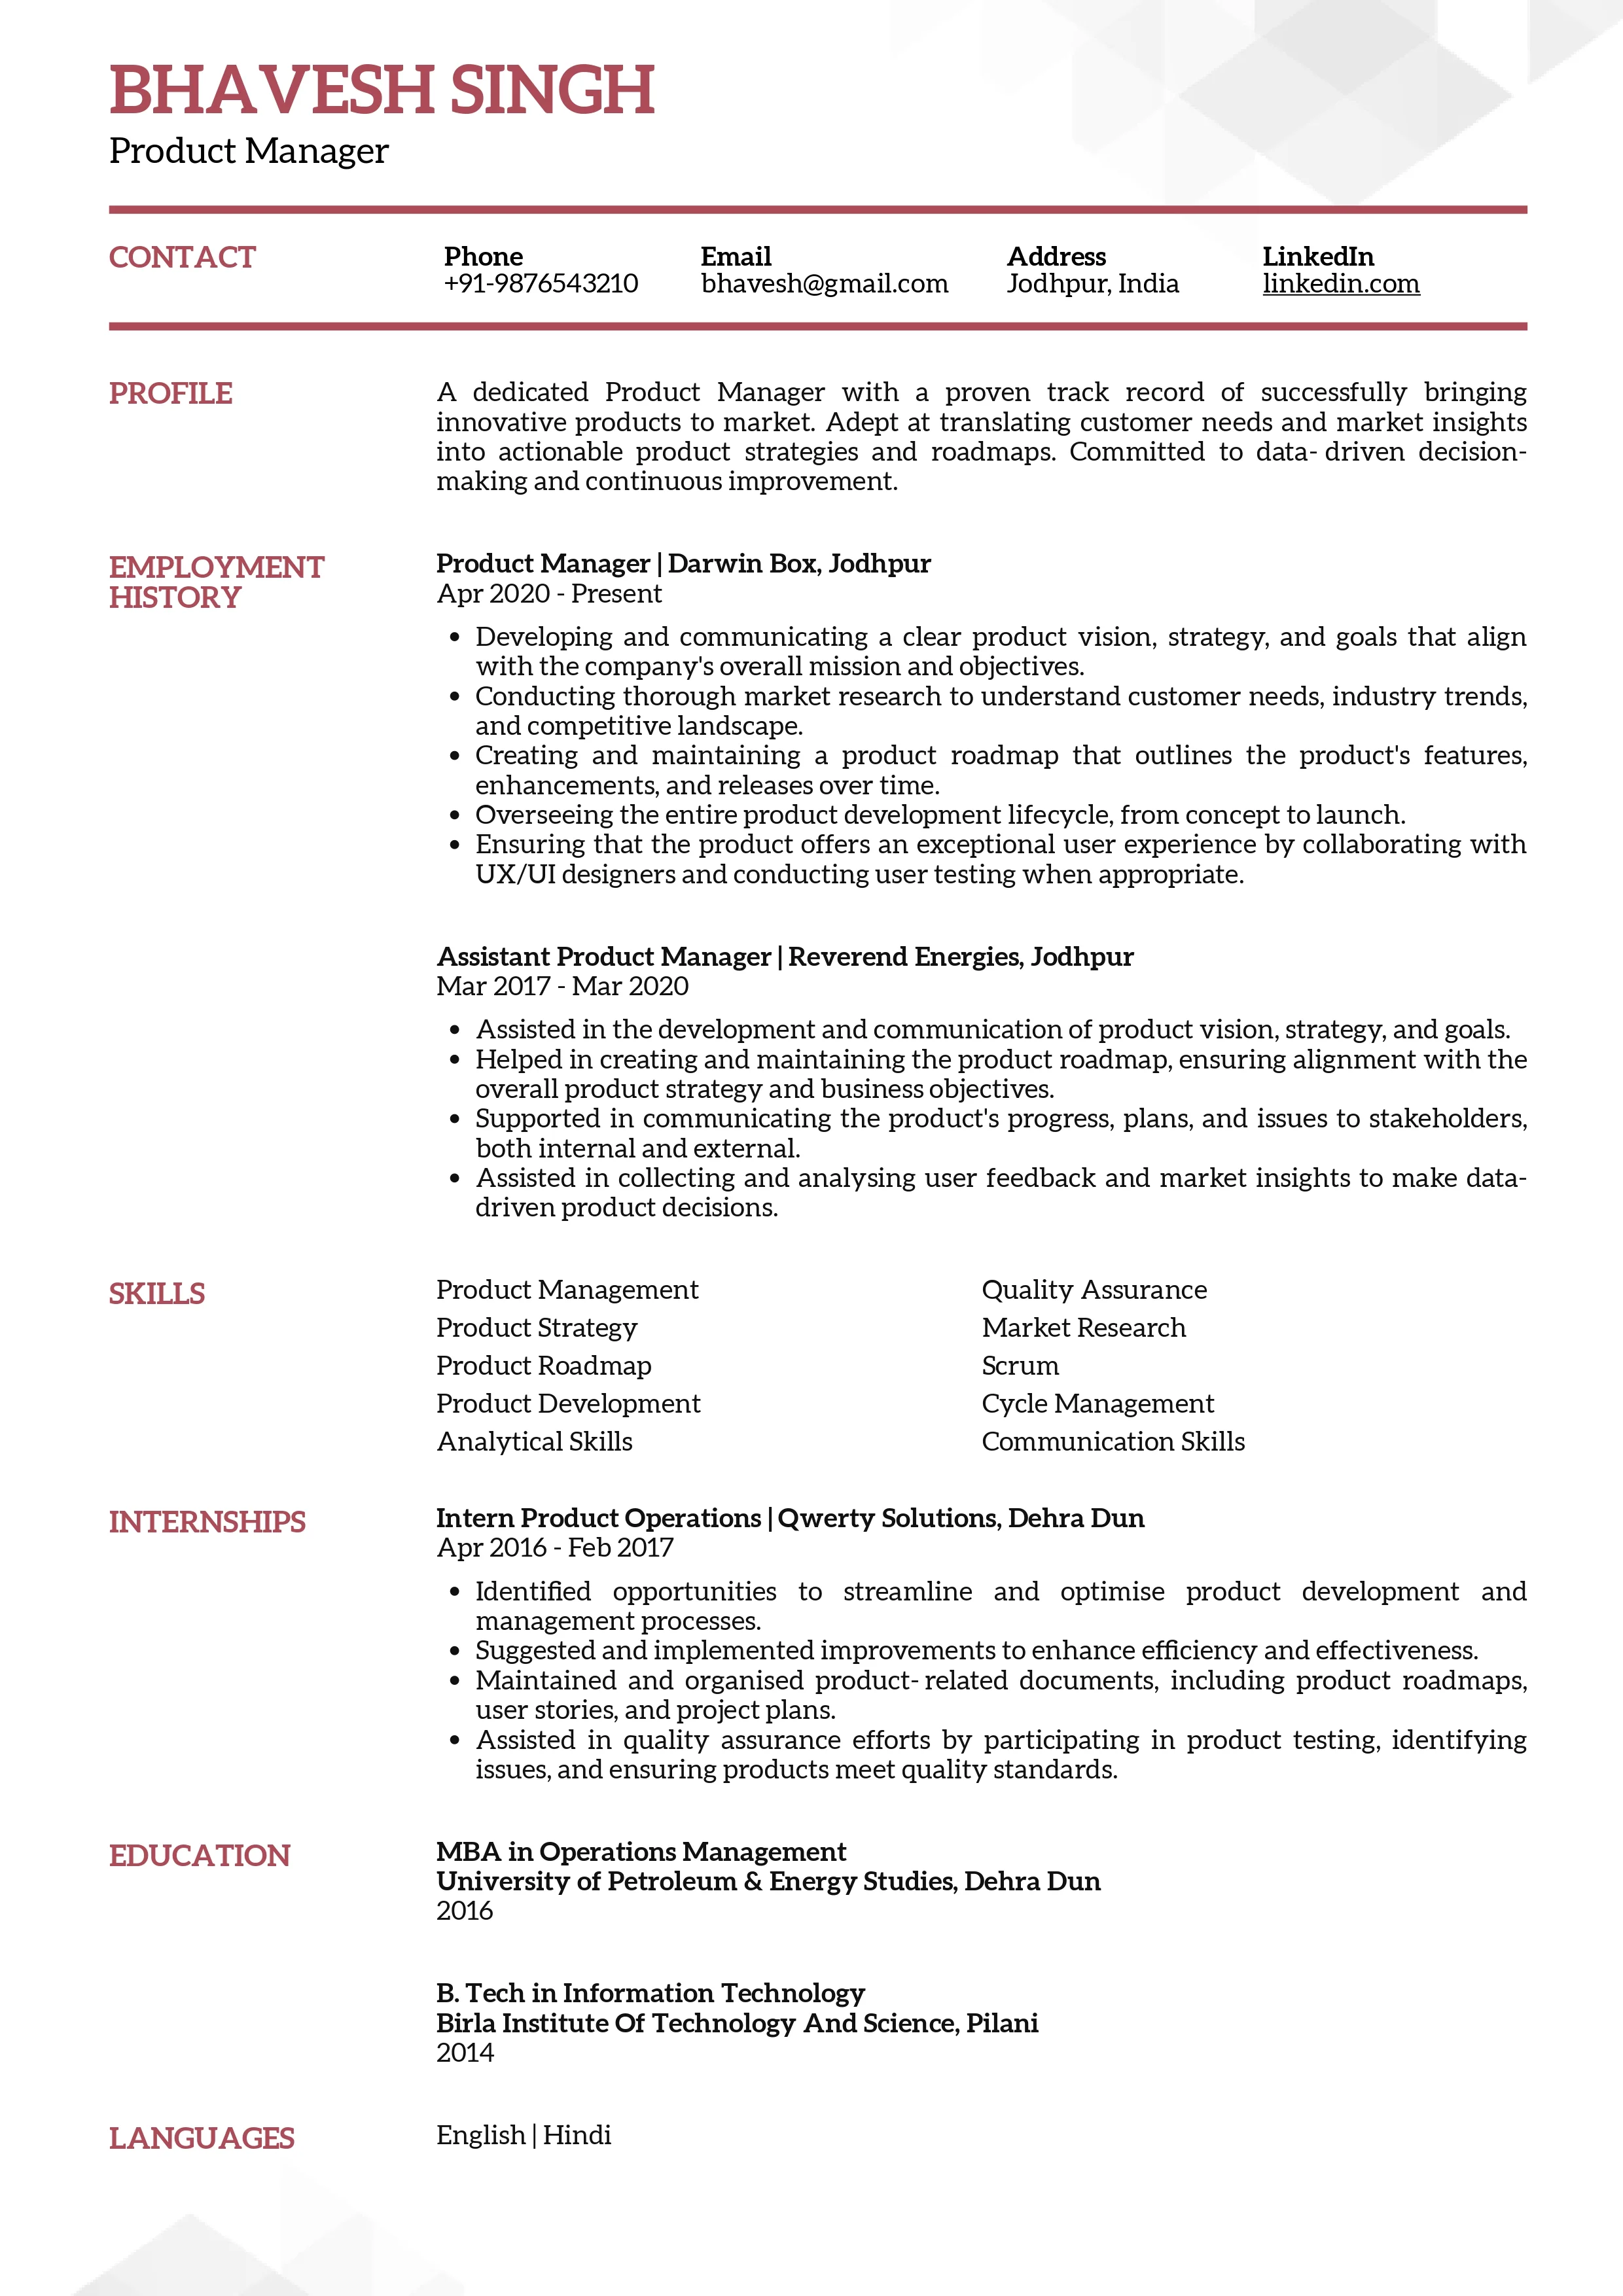 Sample Resume of Product Manager | Free Resume Templates & Samples on Resumod.co